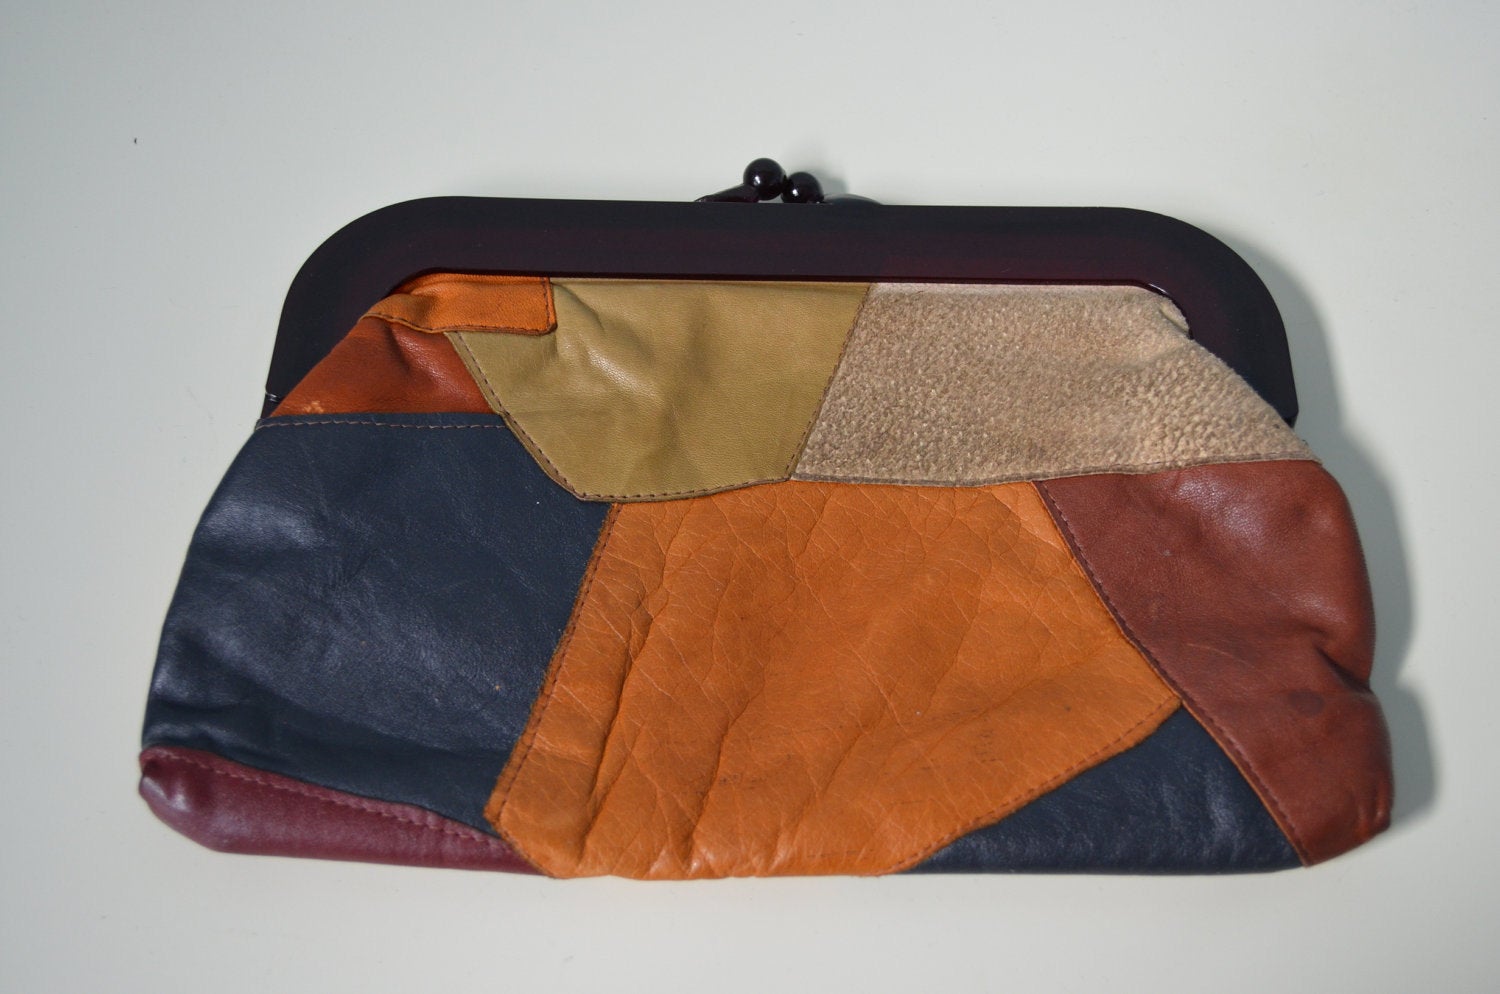 70S Patchwork Boho Chic Woodstock Leather Clutch Bohemian Bag Style